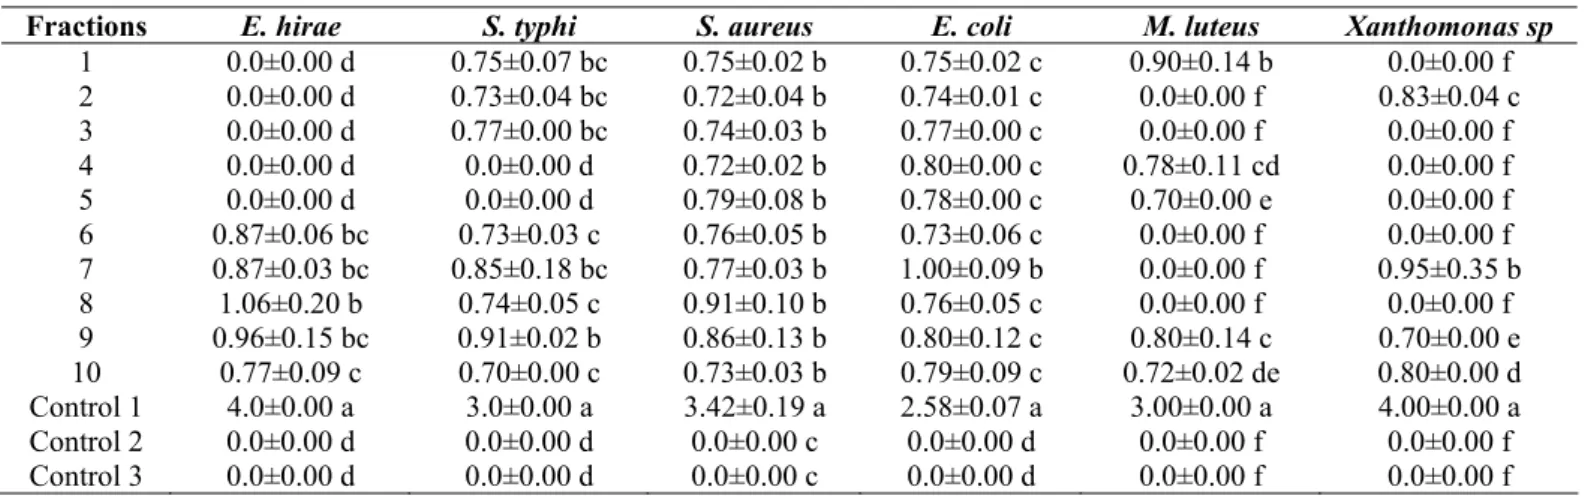 Table 4. Antagonistic activity (halo size in cm) of D. helianthi fractions with pathogenic bacteria 